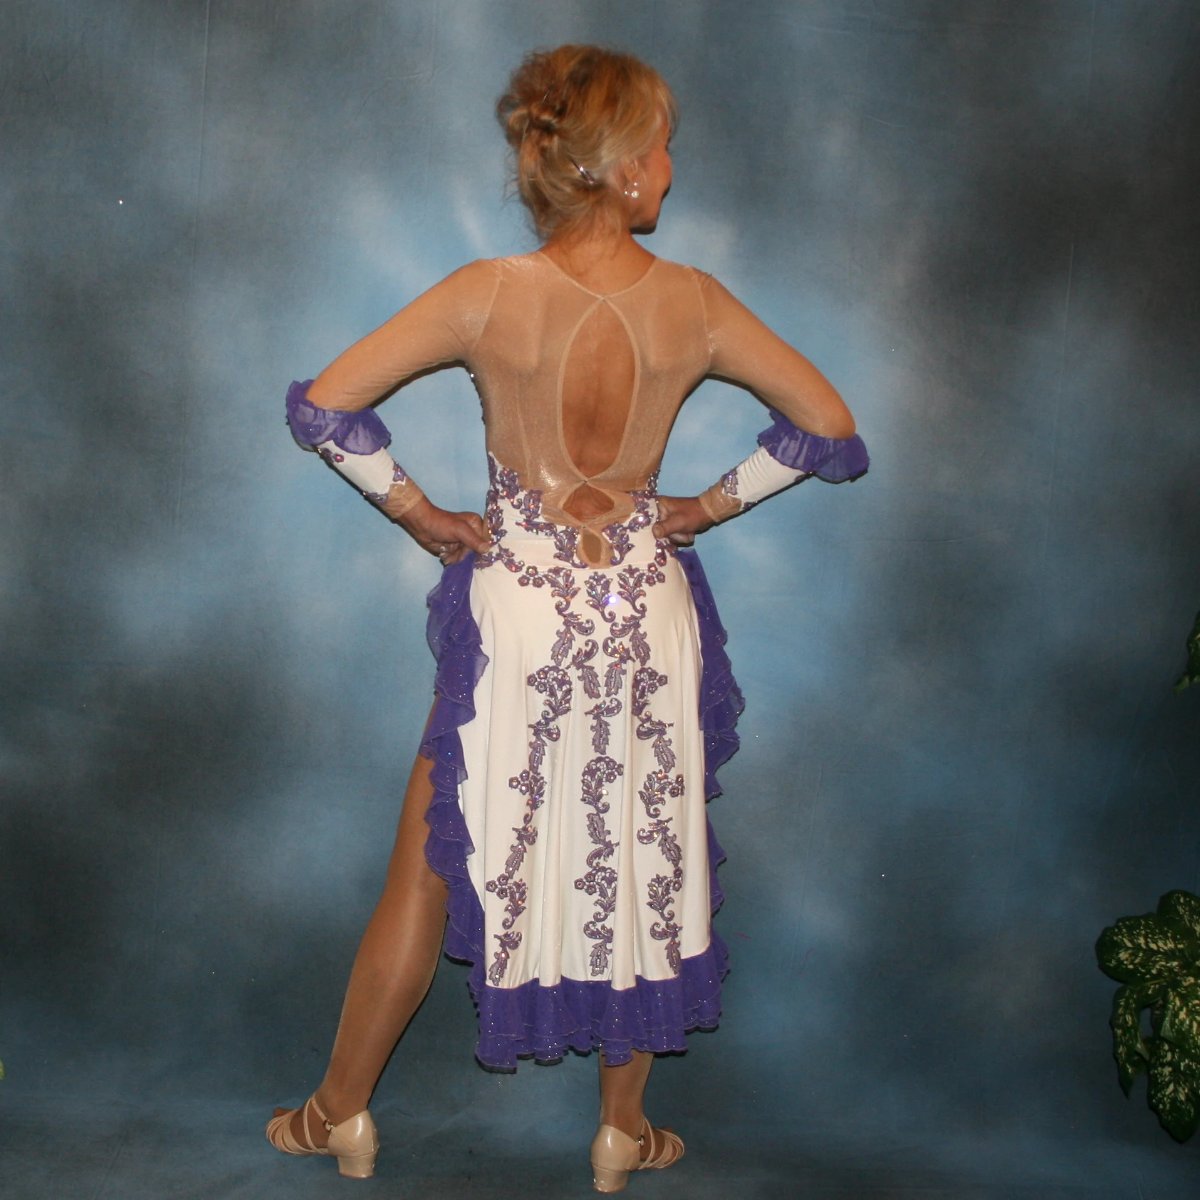 back view of White Latin/rhythm dress created with purple lace motifs embellished with crystal Aurora borealis Swarovski rhinestones overlaid on white lycra, and on nude illusion. The finishing touch are ruffles of glitter flecked chiffon.